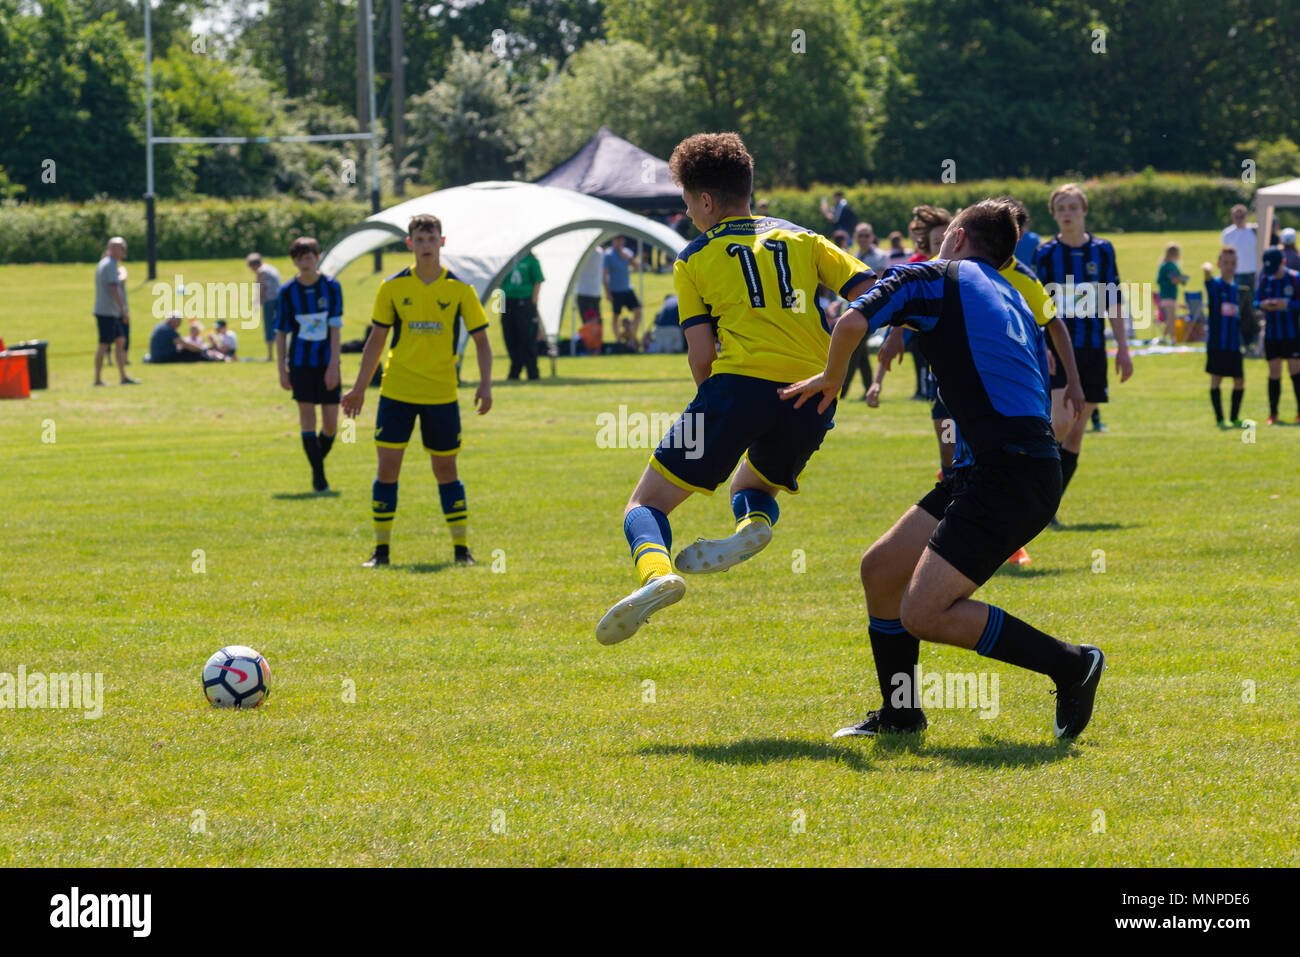 Amateur Football High Resolution Stock Photography and Images - Alamy